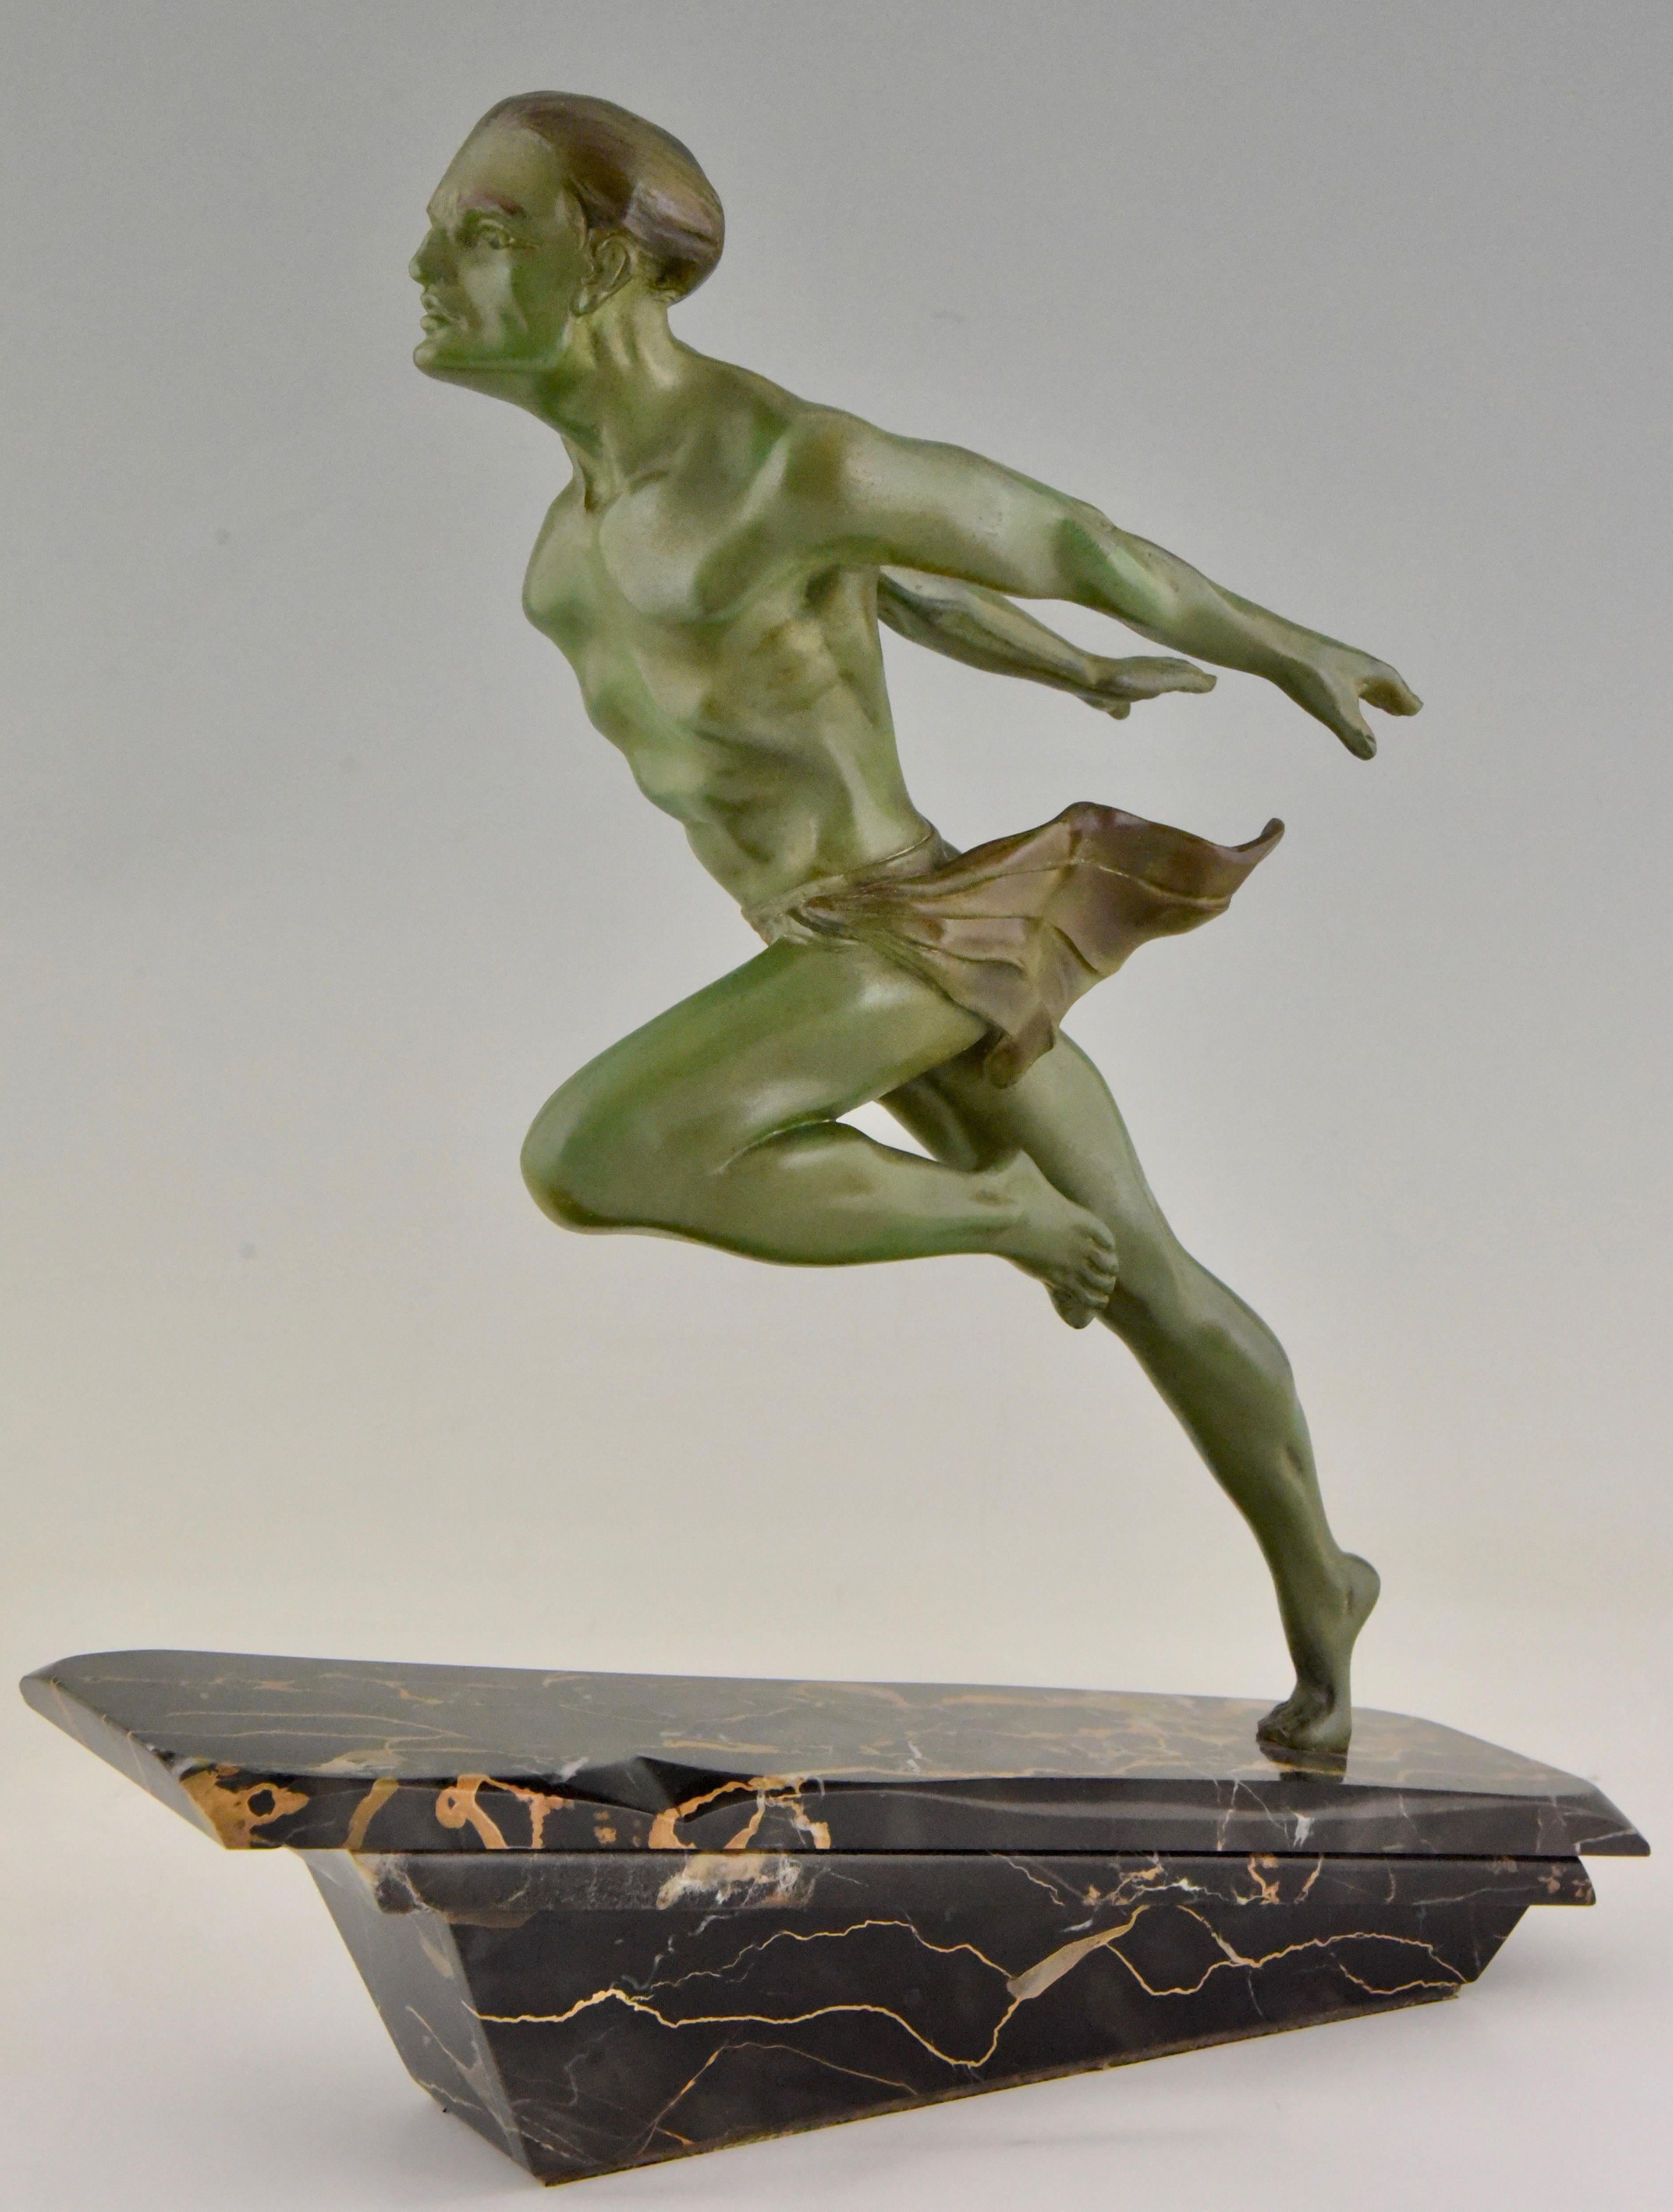 Art Deco sculpture of a running man or athlete signed by the sculptor L. Valderi, France, 1930. Patinated art metal on Portor marble base.

                         